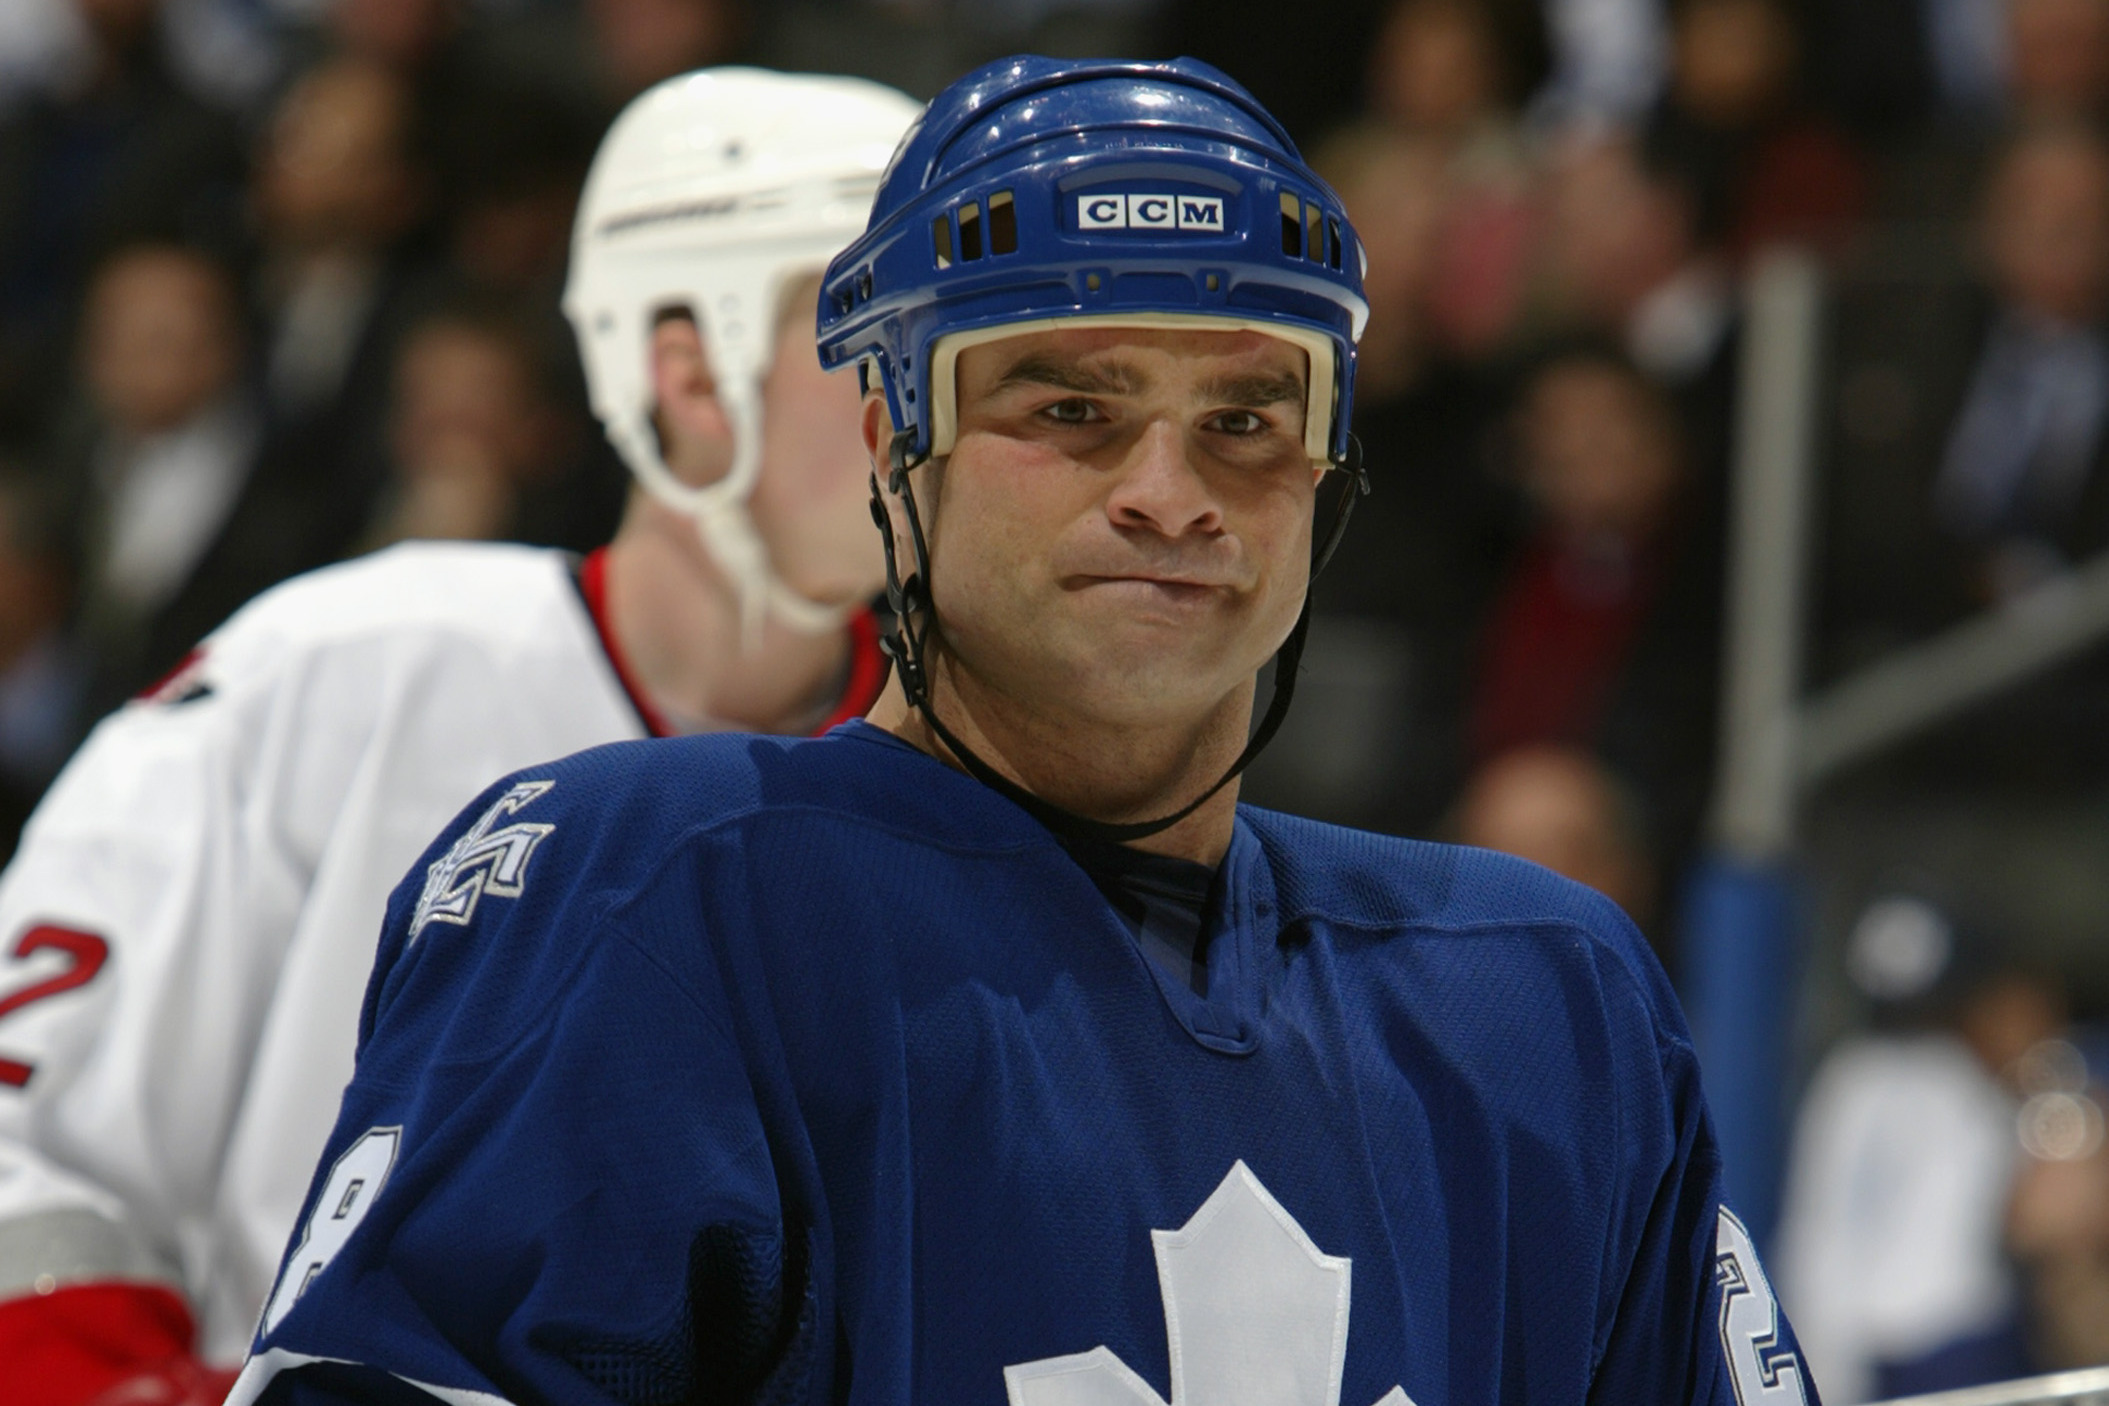 15 biggest NHL personalities of the last 20 years